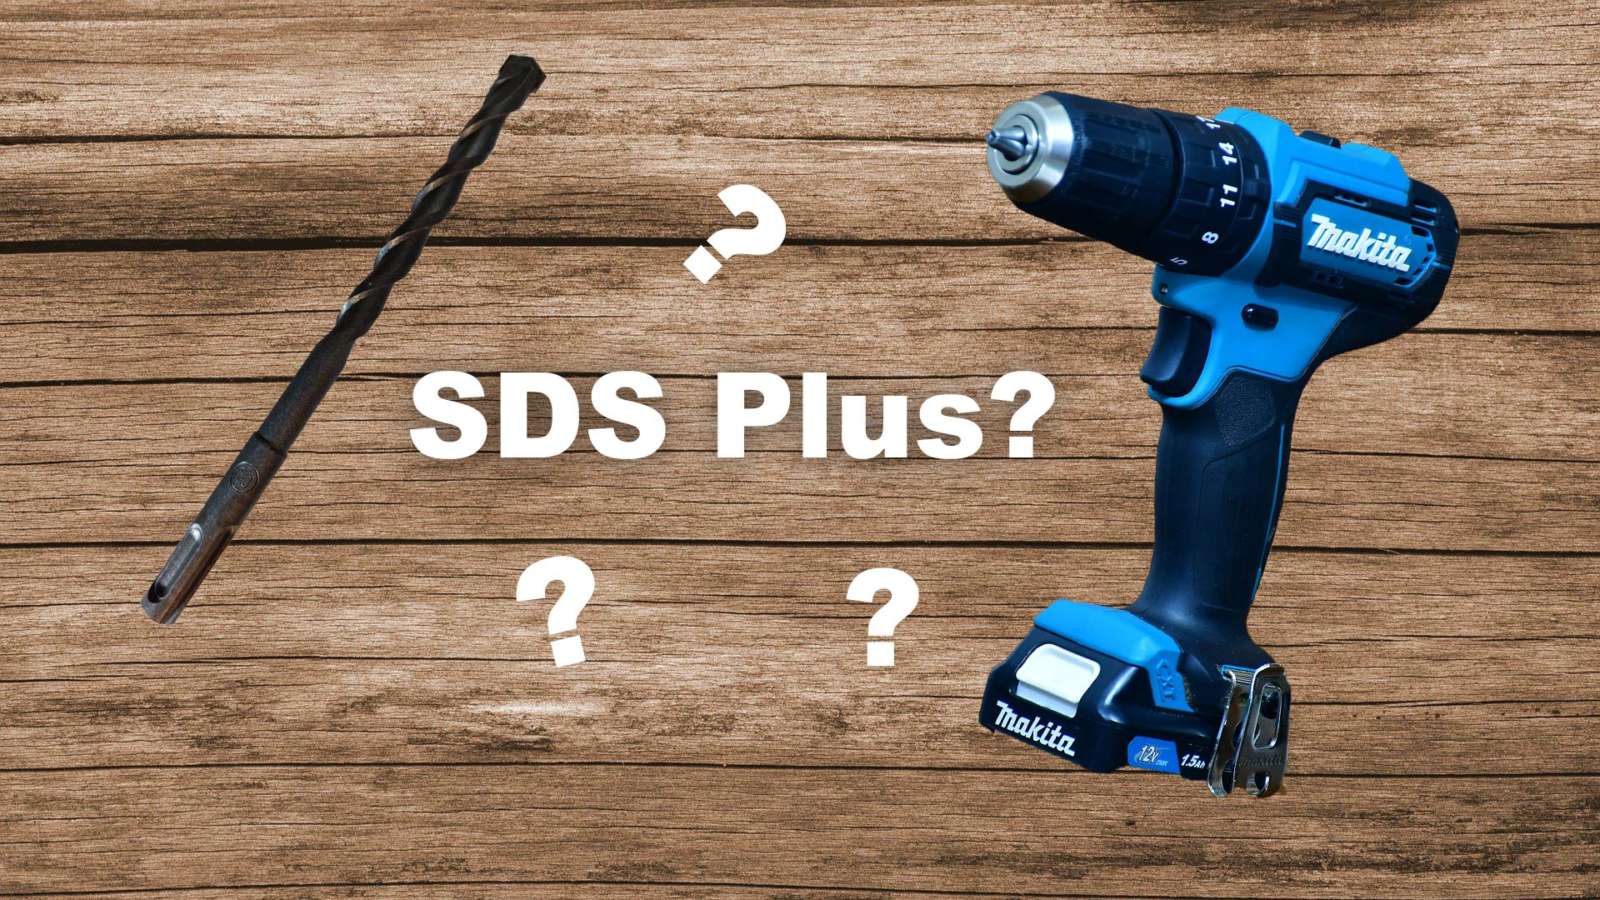 Can You Use Sds Drill Bits In A Normal Drill? - The Habit of Woodworking